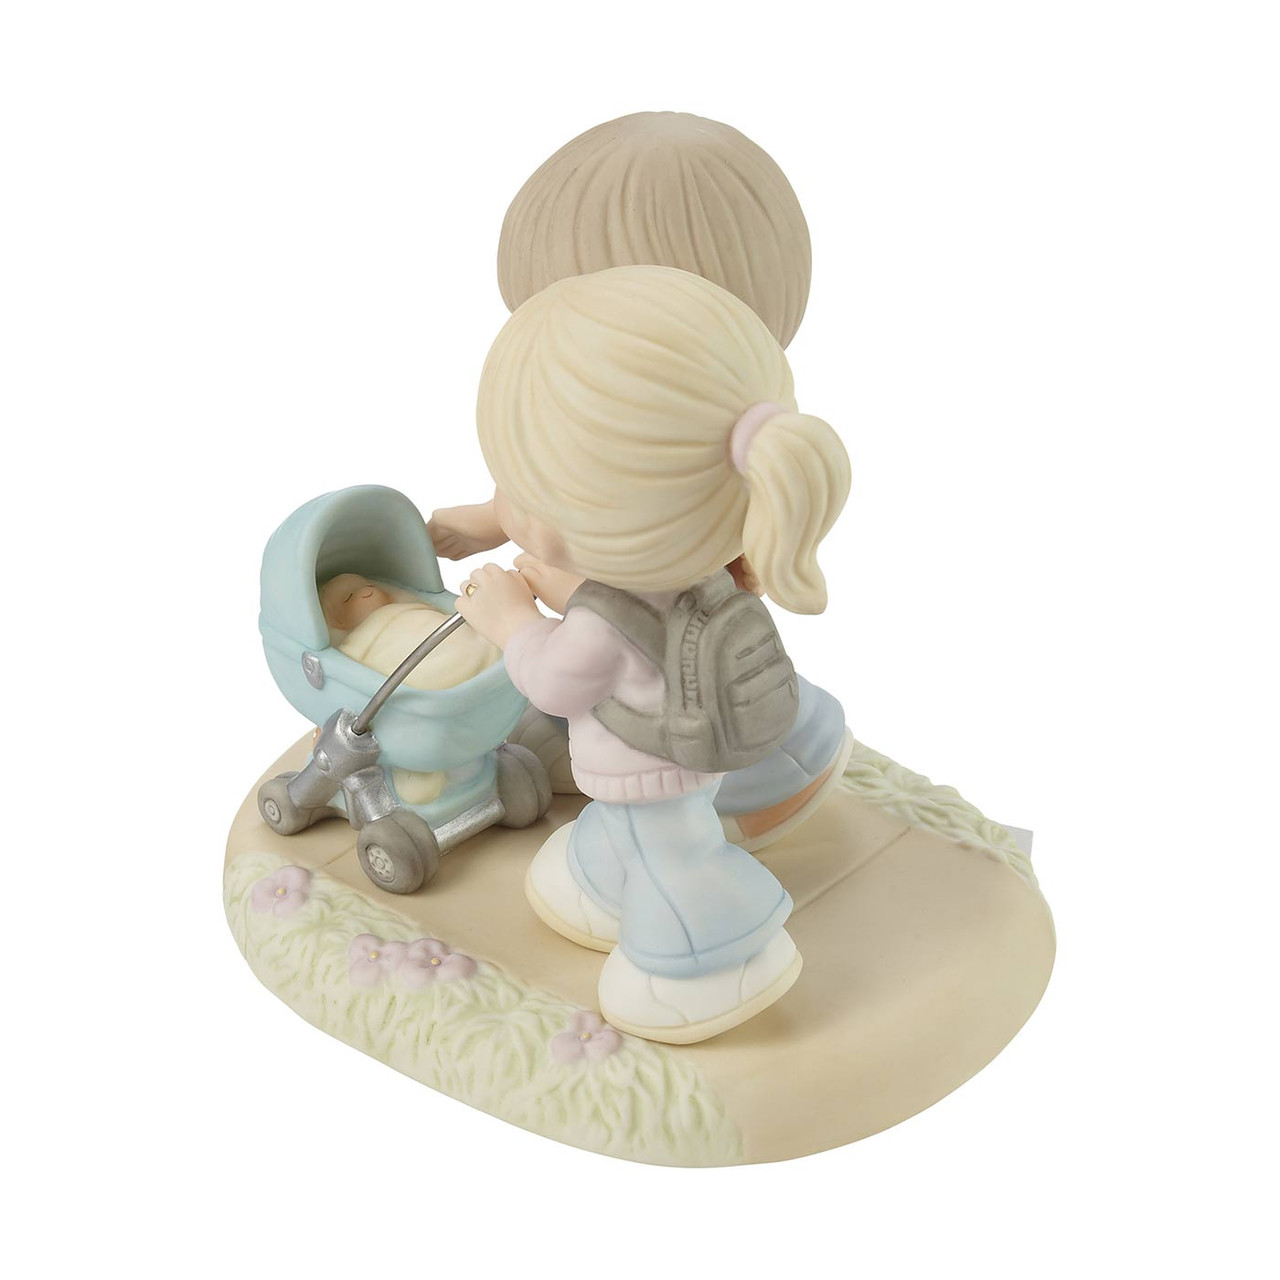 Precious Moments You Strolled Into Our Hearts Figurine, 46% OFF